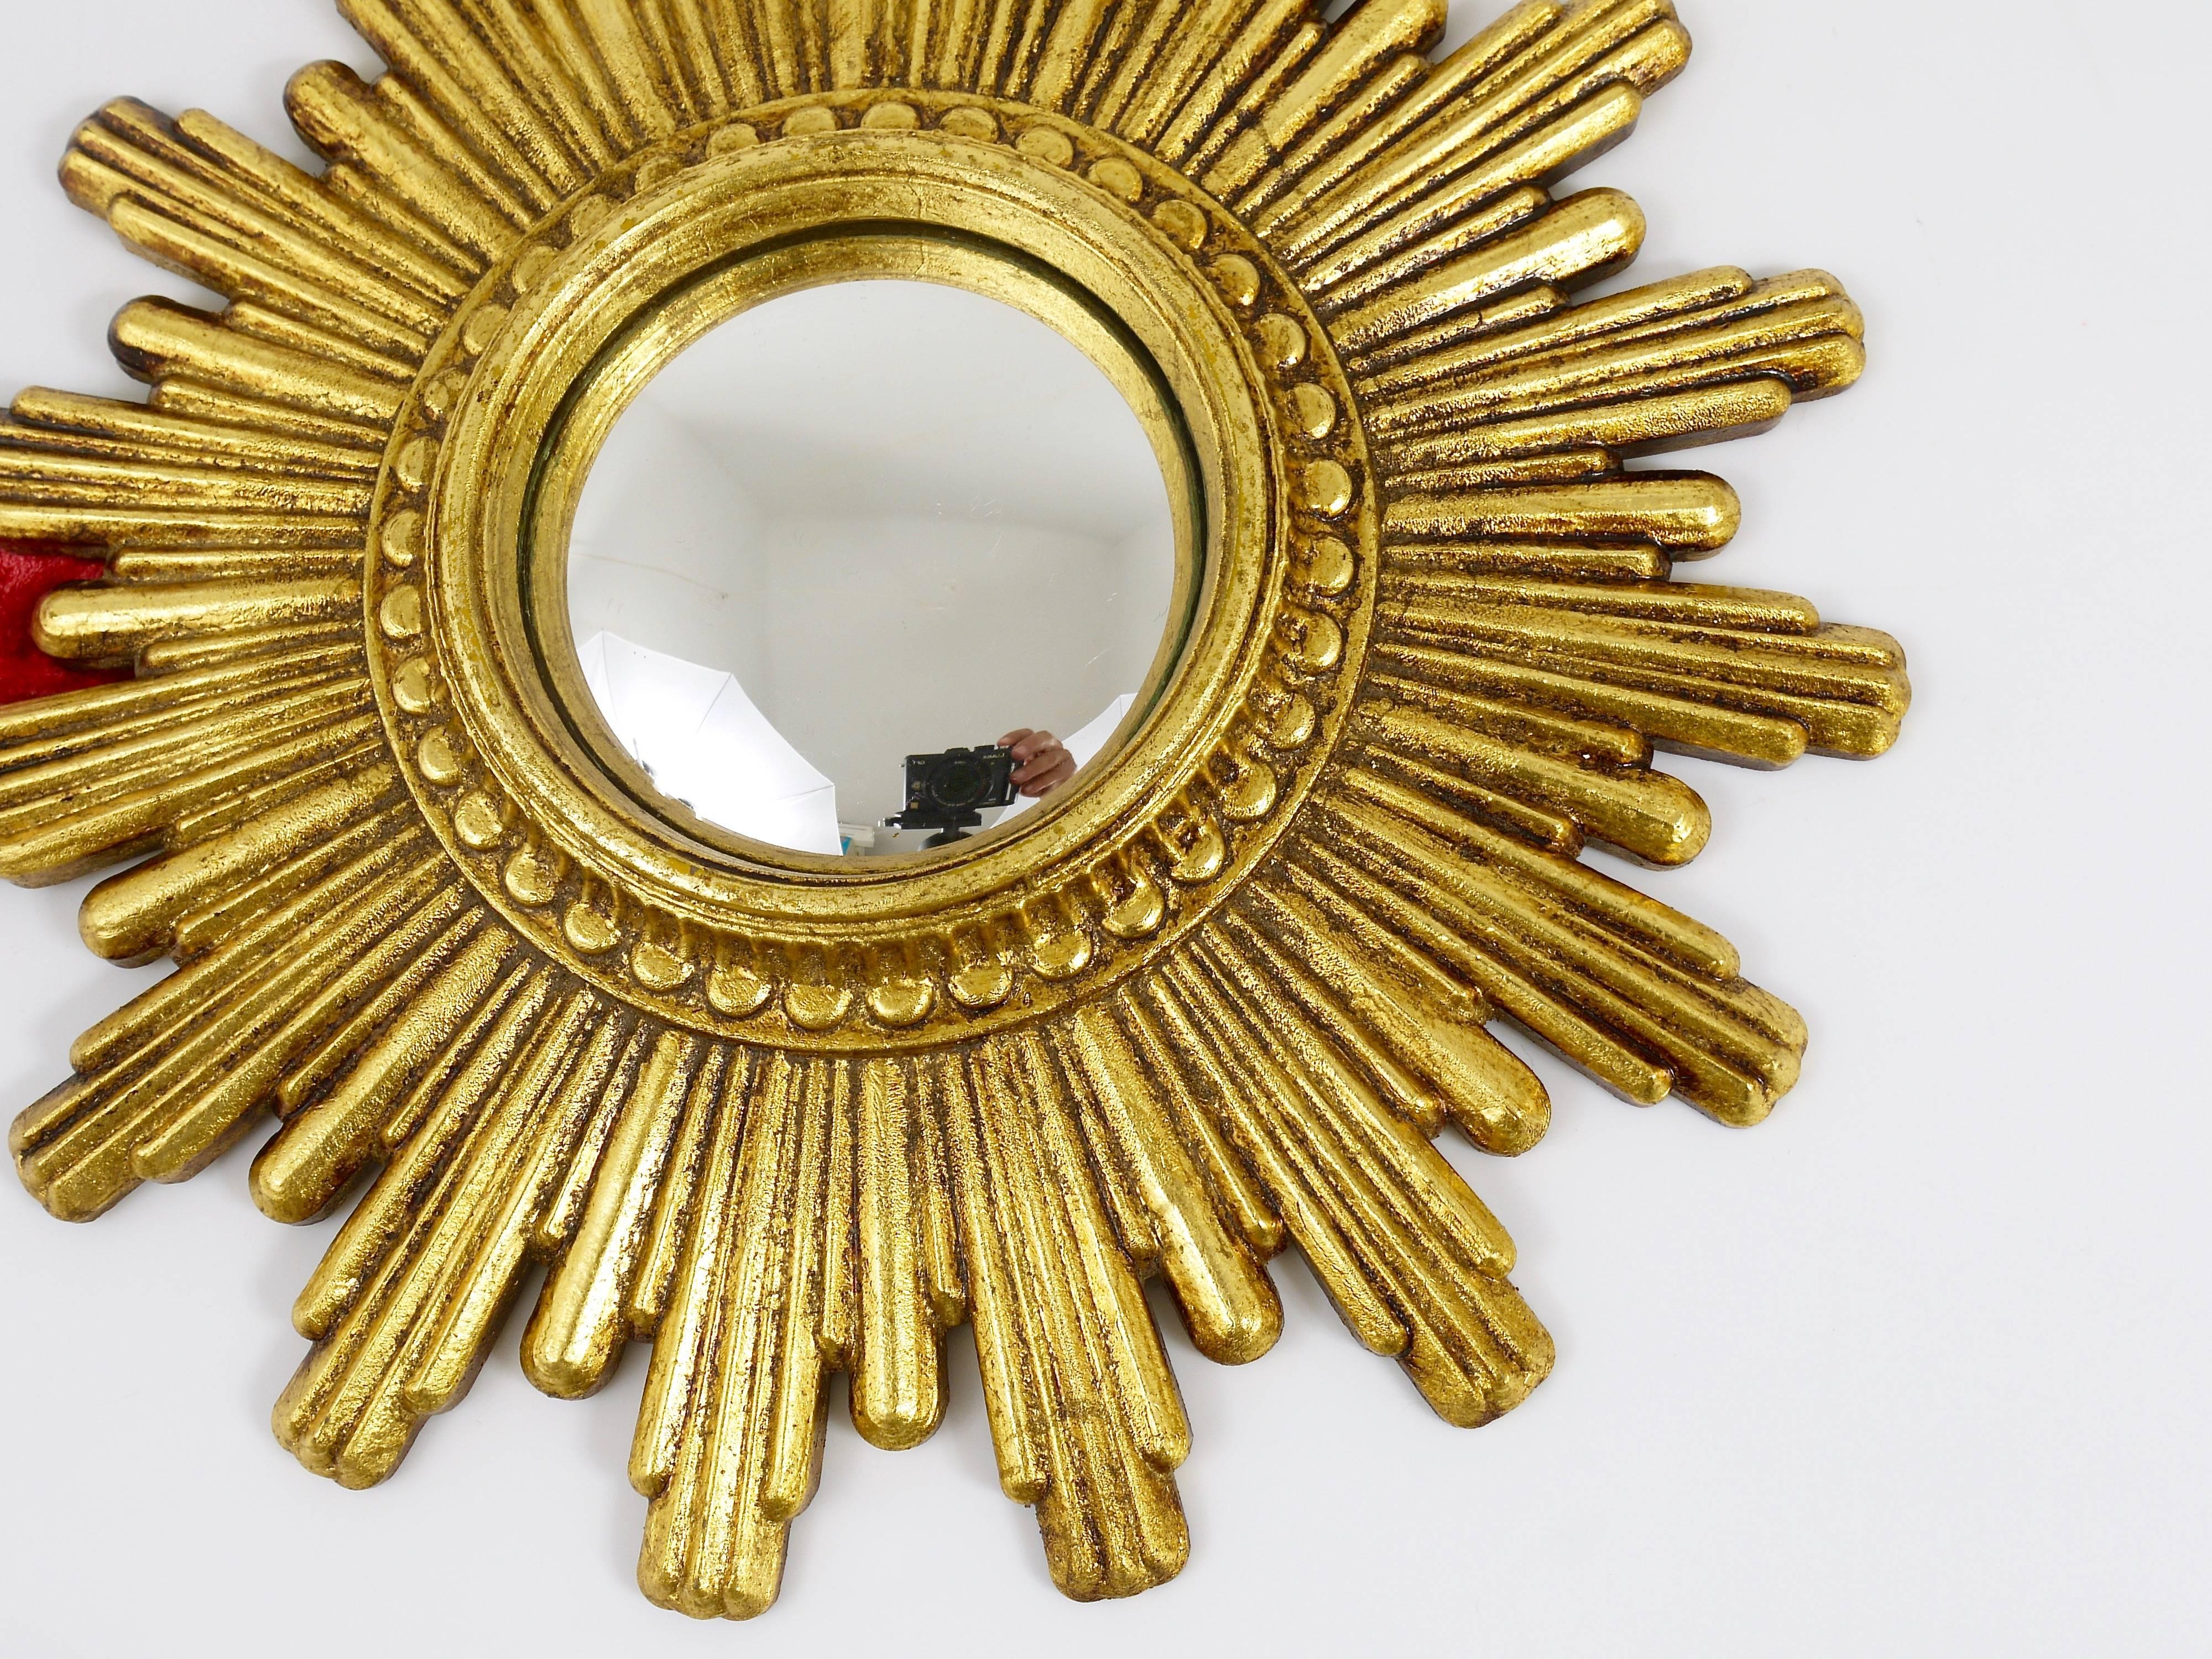 A beautiful French sunburst mirror from the 1960s with convex mirror glass. Made of resin, in very good condition. Total diameter: 9.5